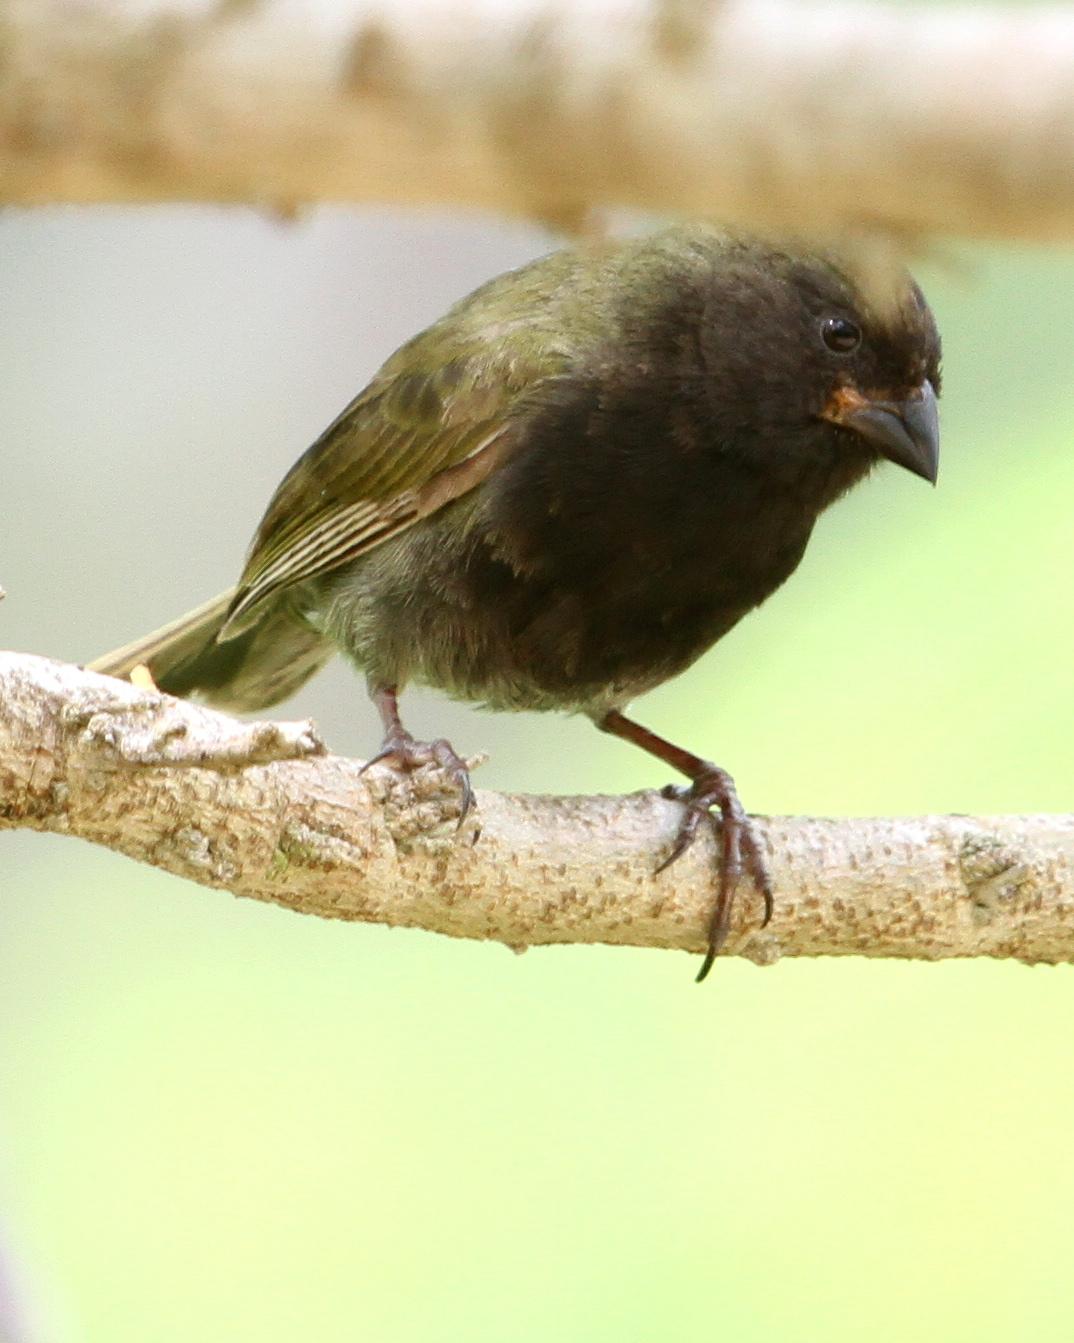 Black-faced Grassquit Photo by Monte Taylor